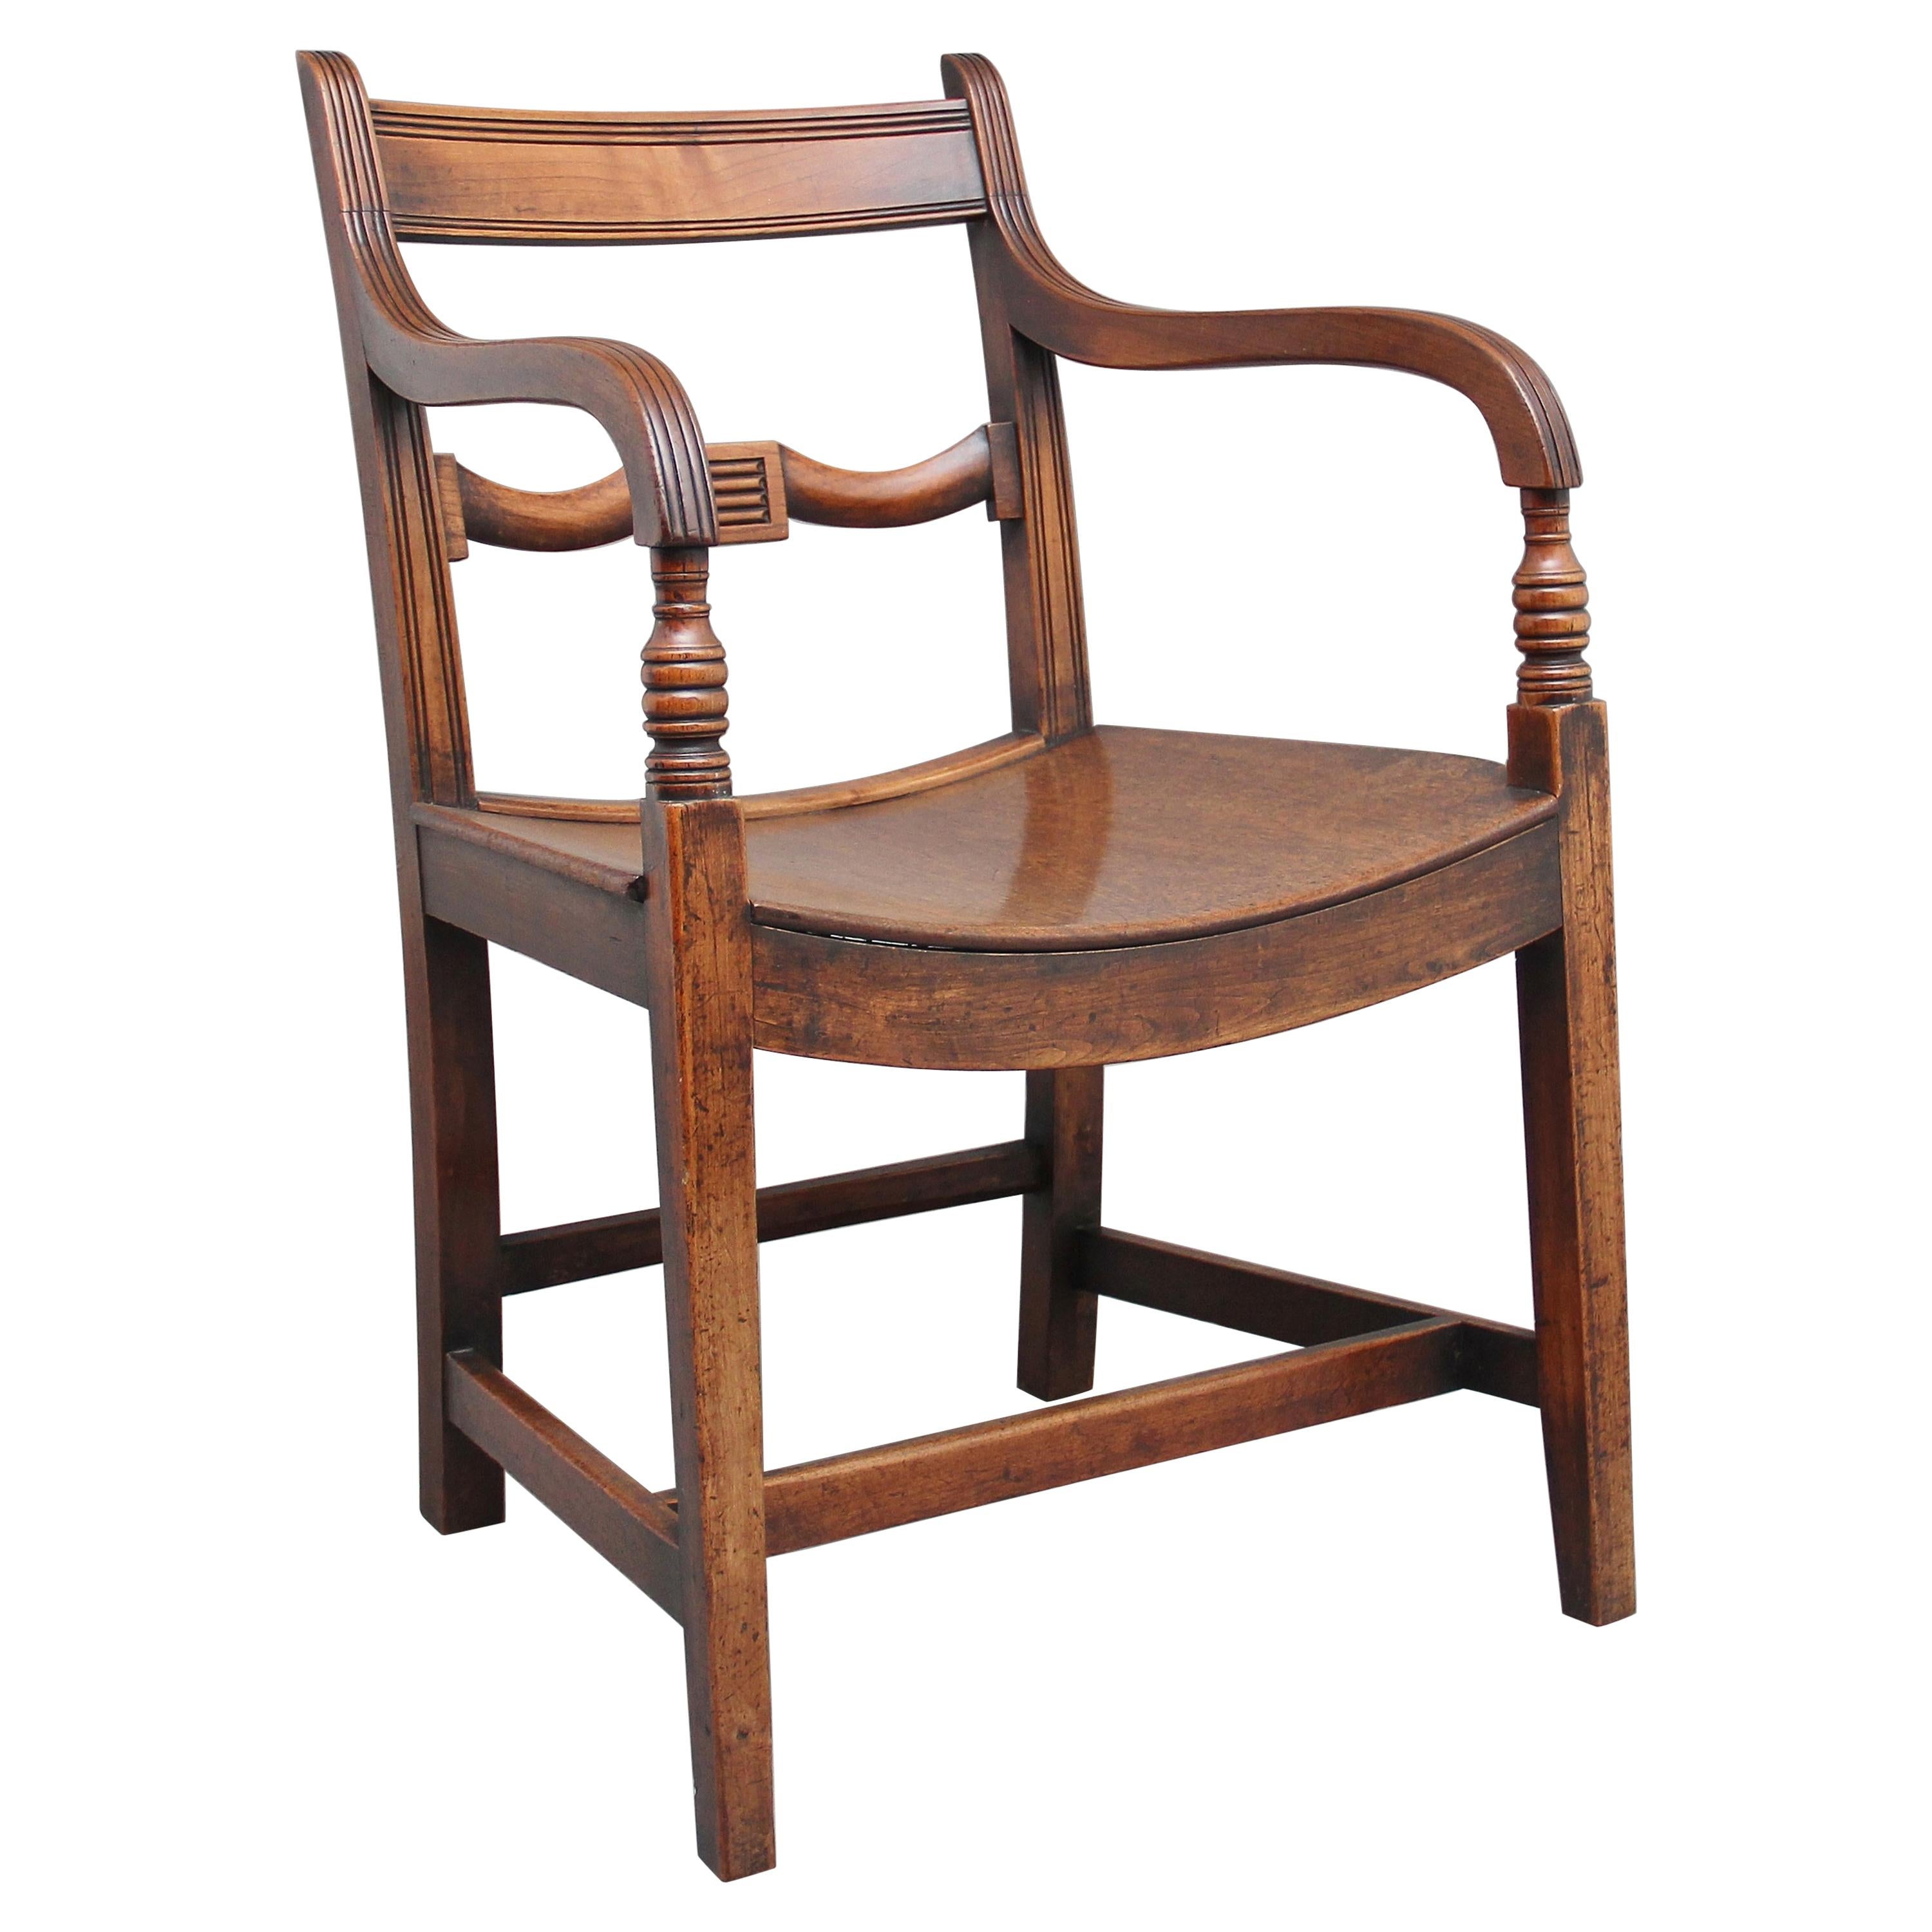 Early 19th Century Ash and Elm Armchair